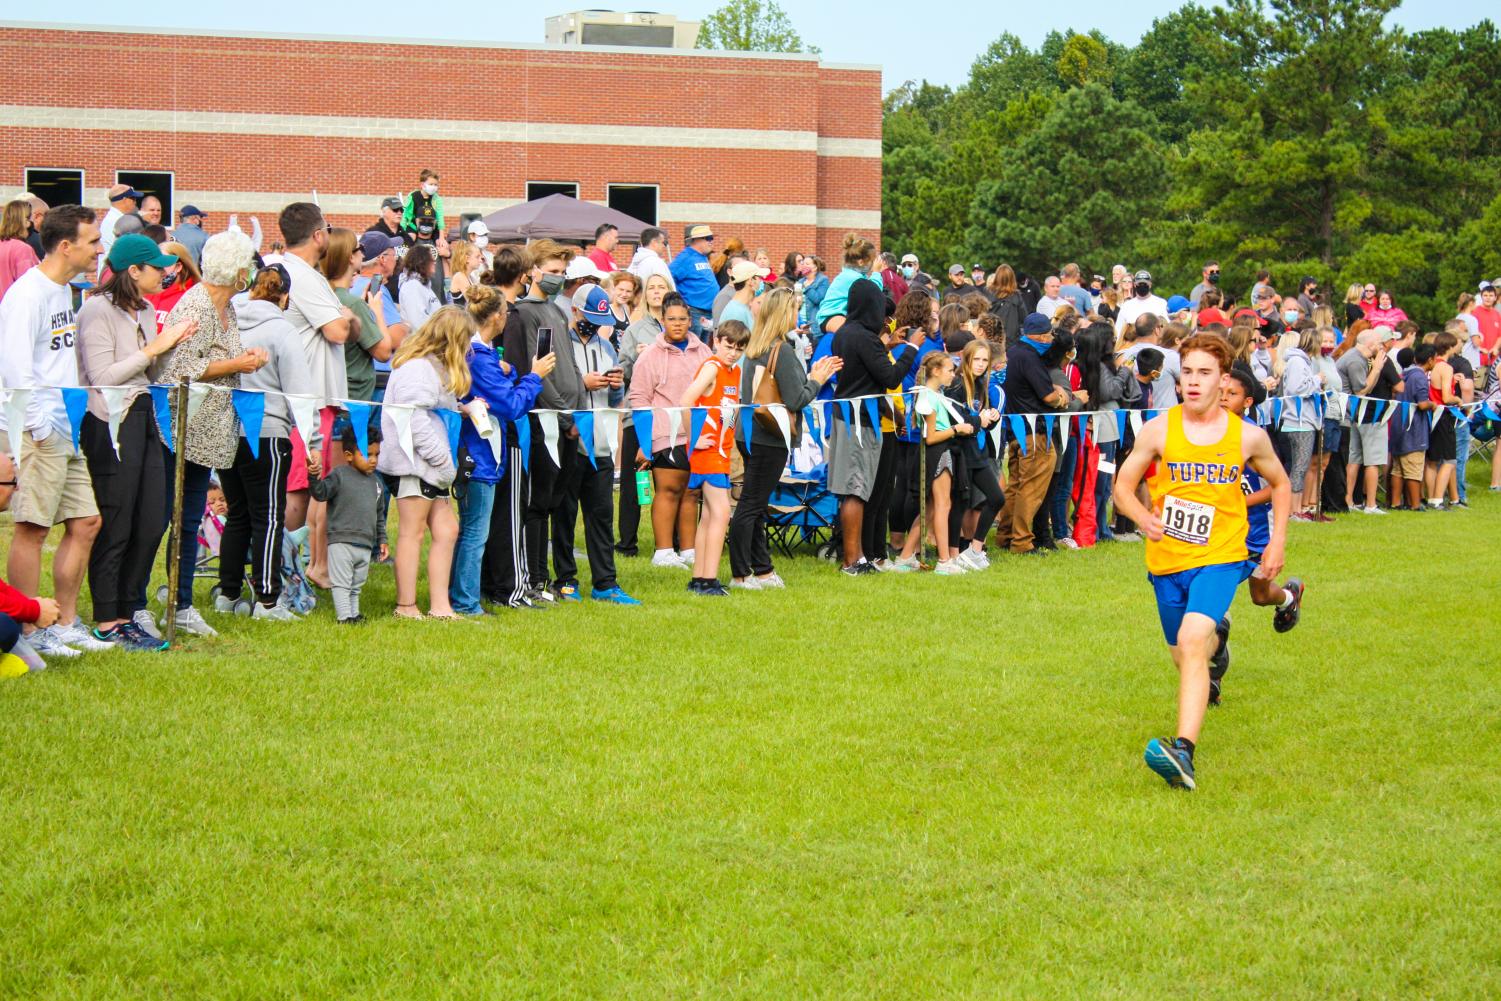 Tupelo+XC+crosses+the+finish+line+in+3rd